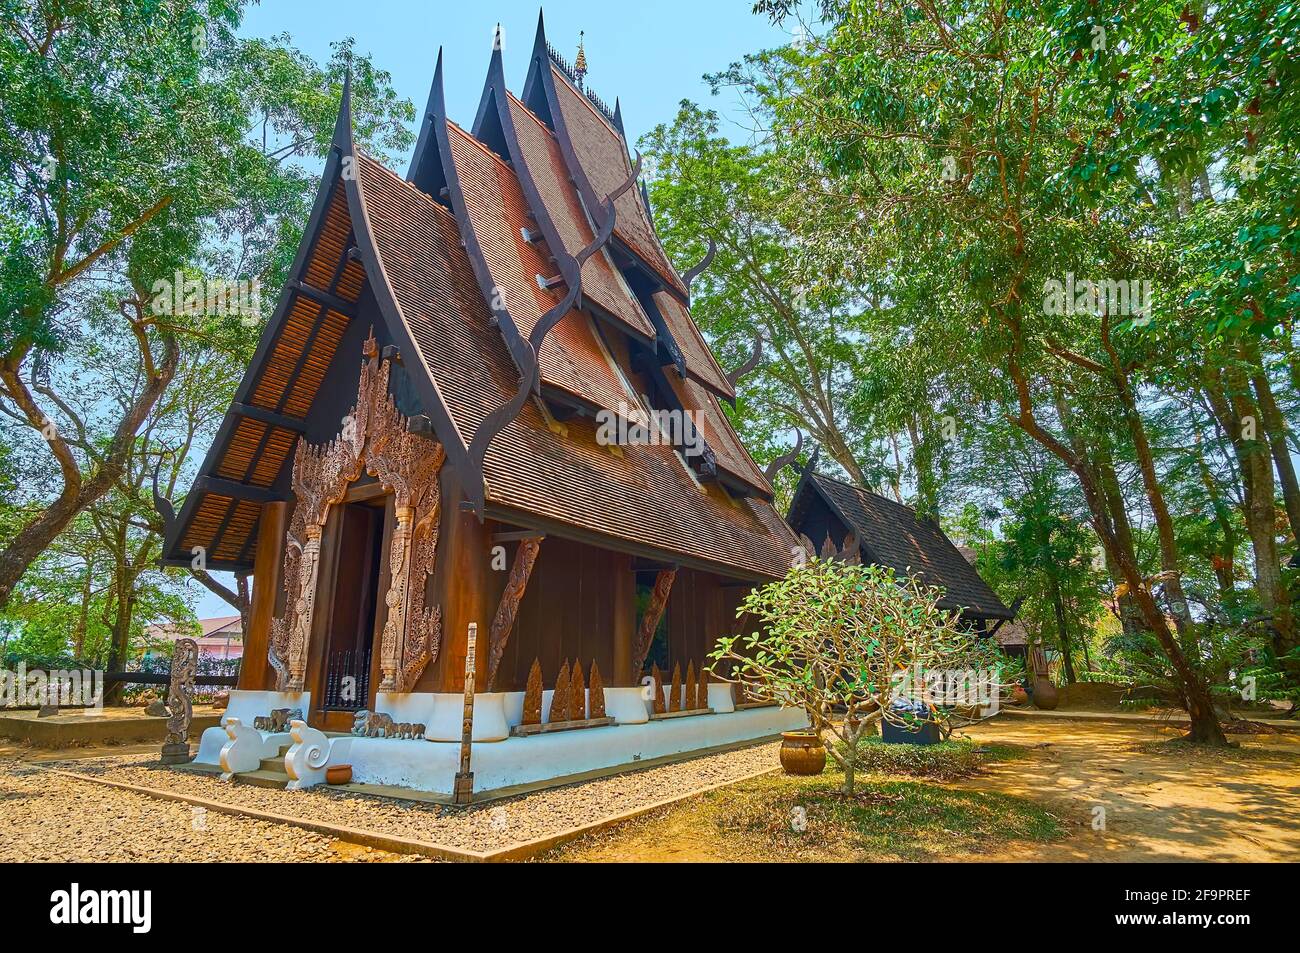 CHIANG RAI, THAILAND - MAY 11, 2019: The scenic  wooden Lanna style Sanctuary of Rama with tall gable roof, Black House (Baan Dam) Museum, on May 11 i Stock Photo